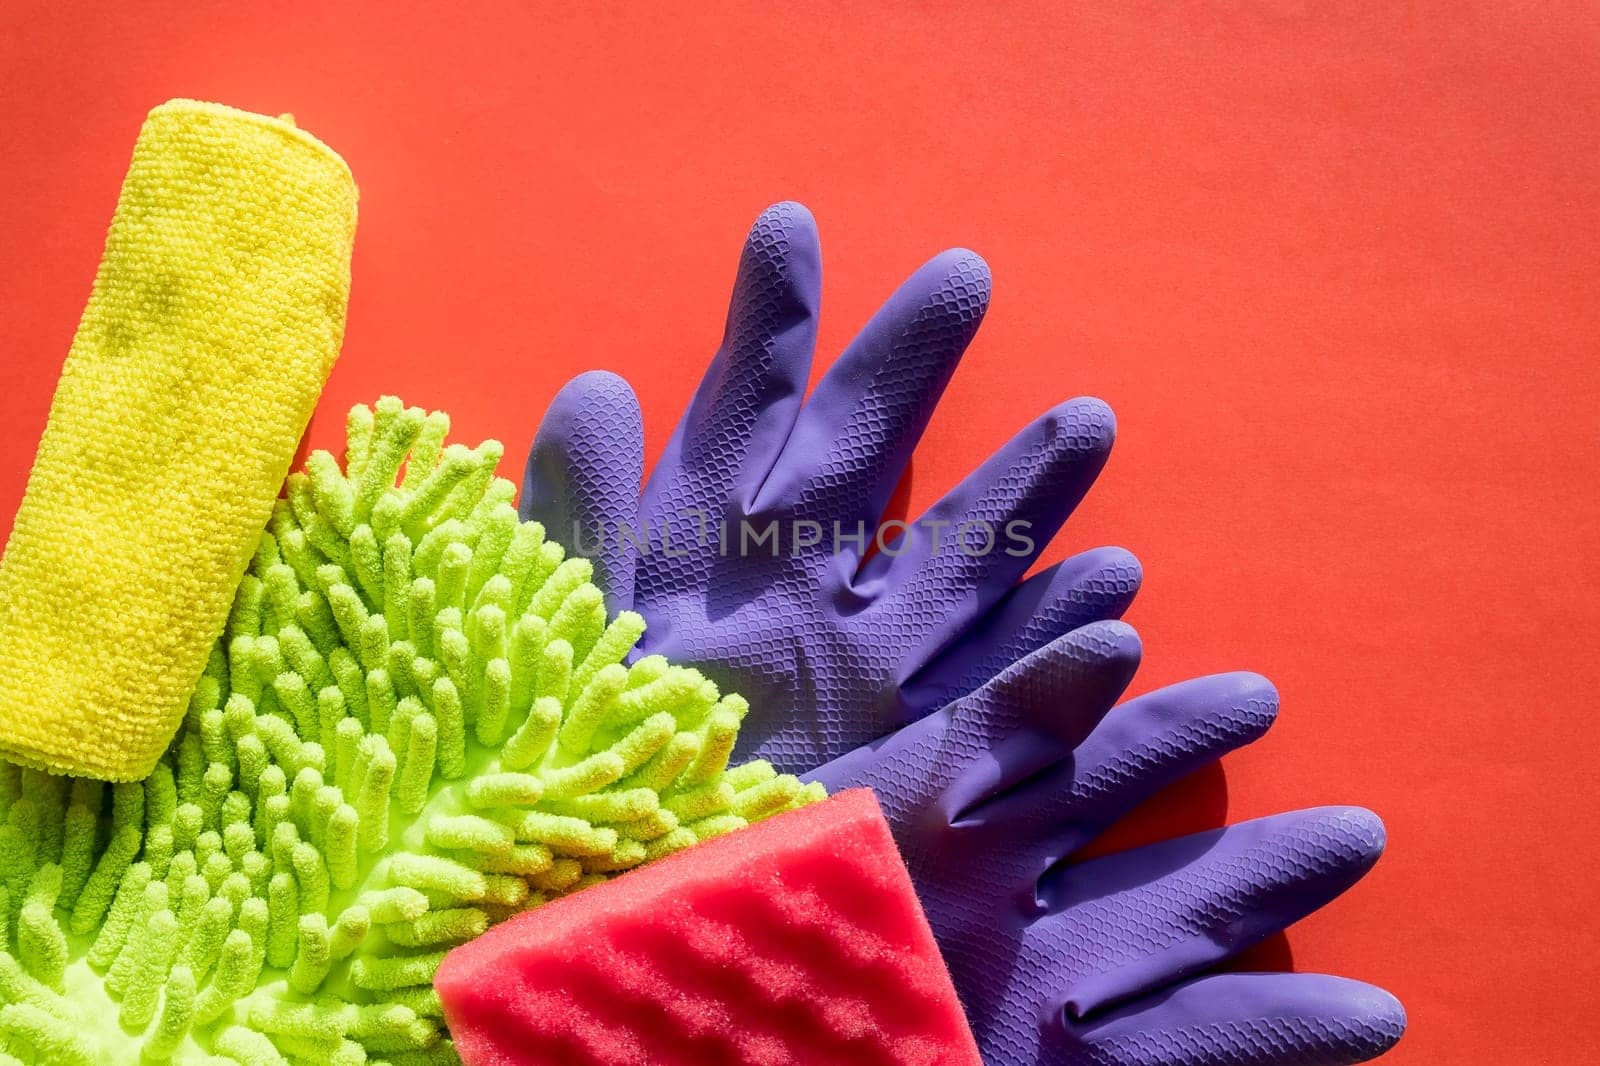 Colorful cleaning set for different surfaces in kitchen, rooms. Copy space for text or logo on red background. Cleaning service concept. Early spring regular clean up.Sponge and microfiber rags, protective gloves by YuliaYaspe1979